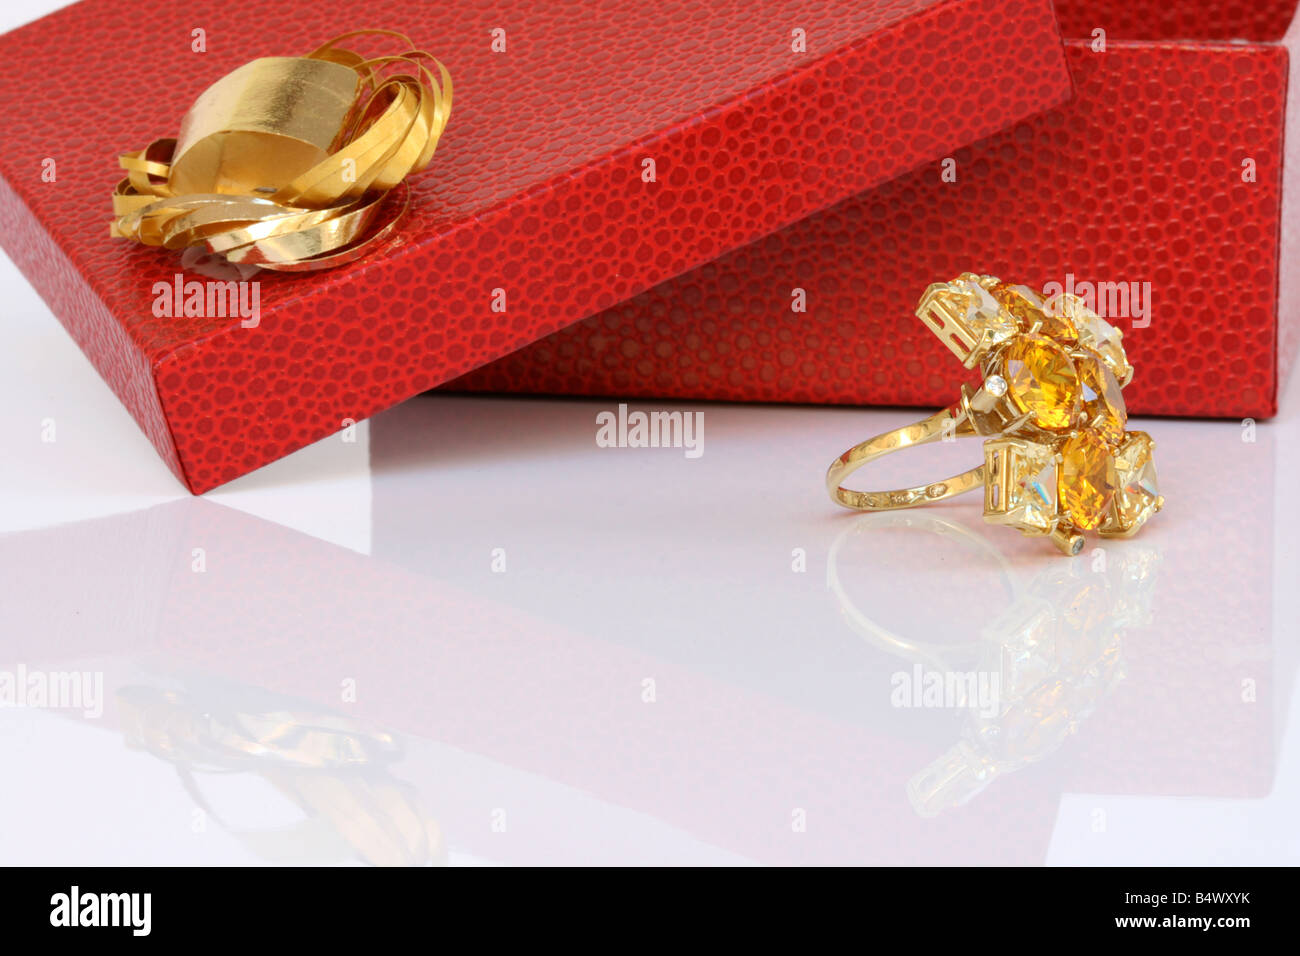 open red gift box and gold ring with reflection Stock Photo